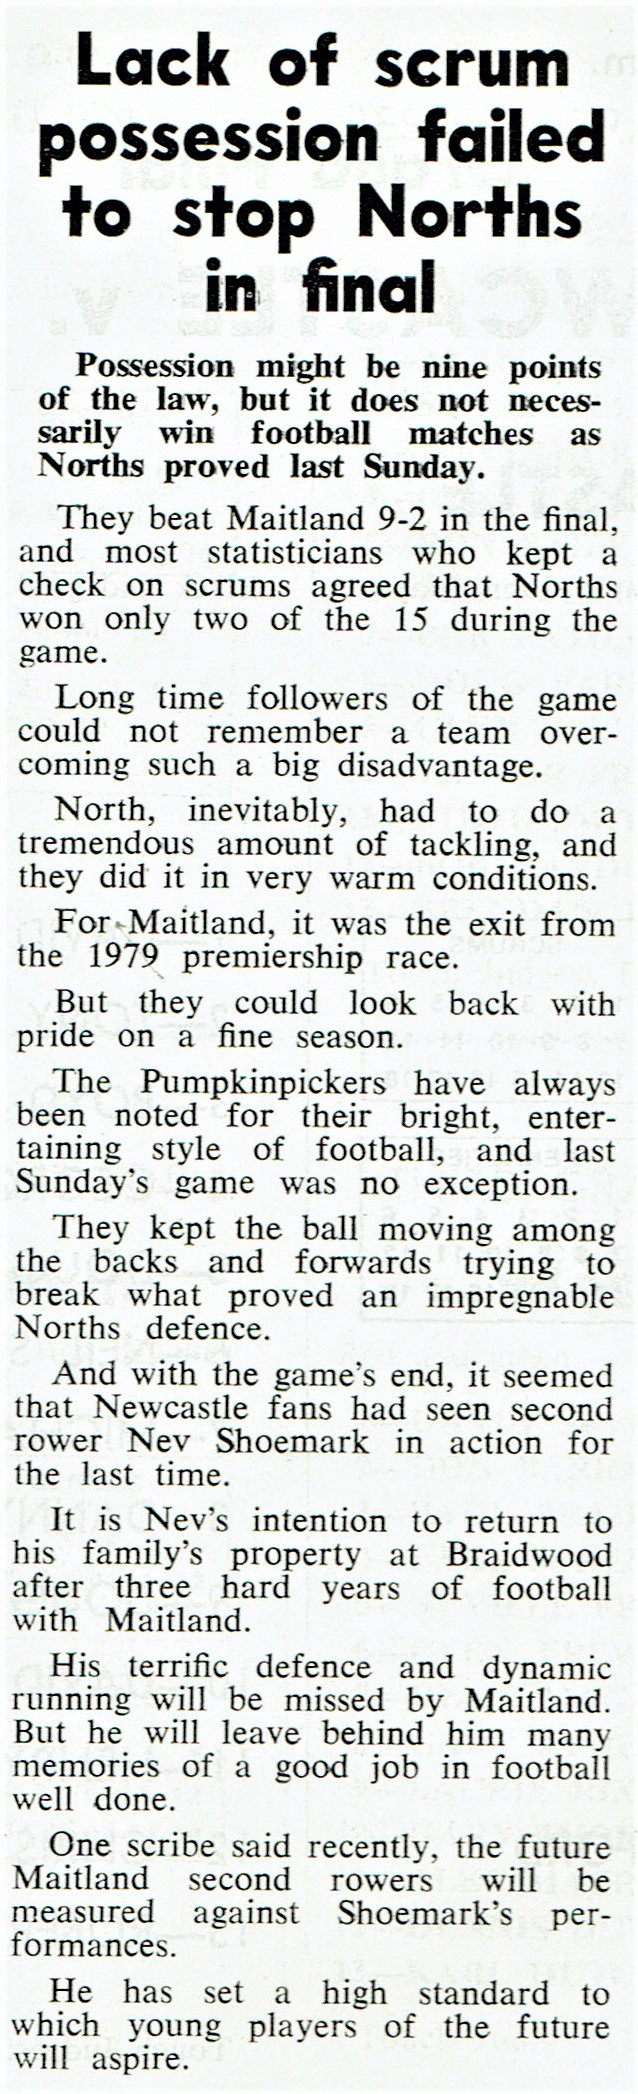 North Newcastle defeat Maitland in Final 1979.